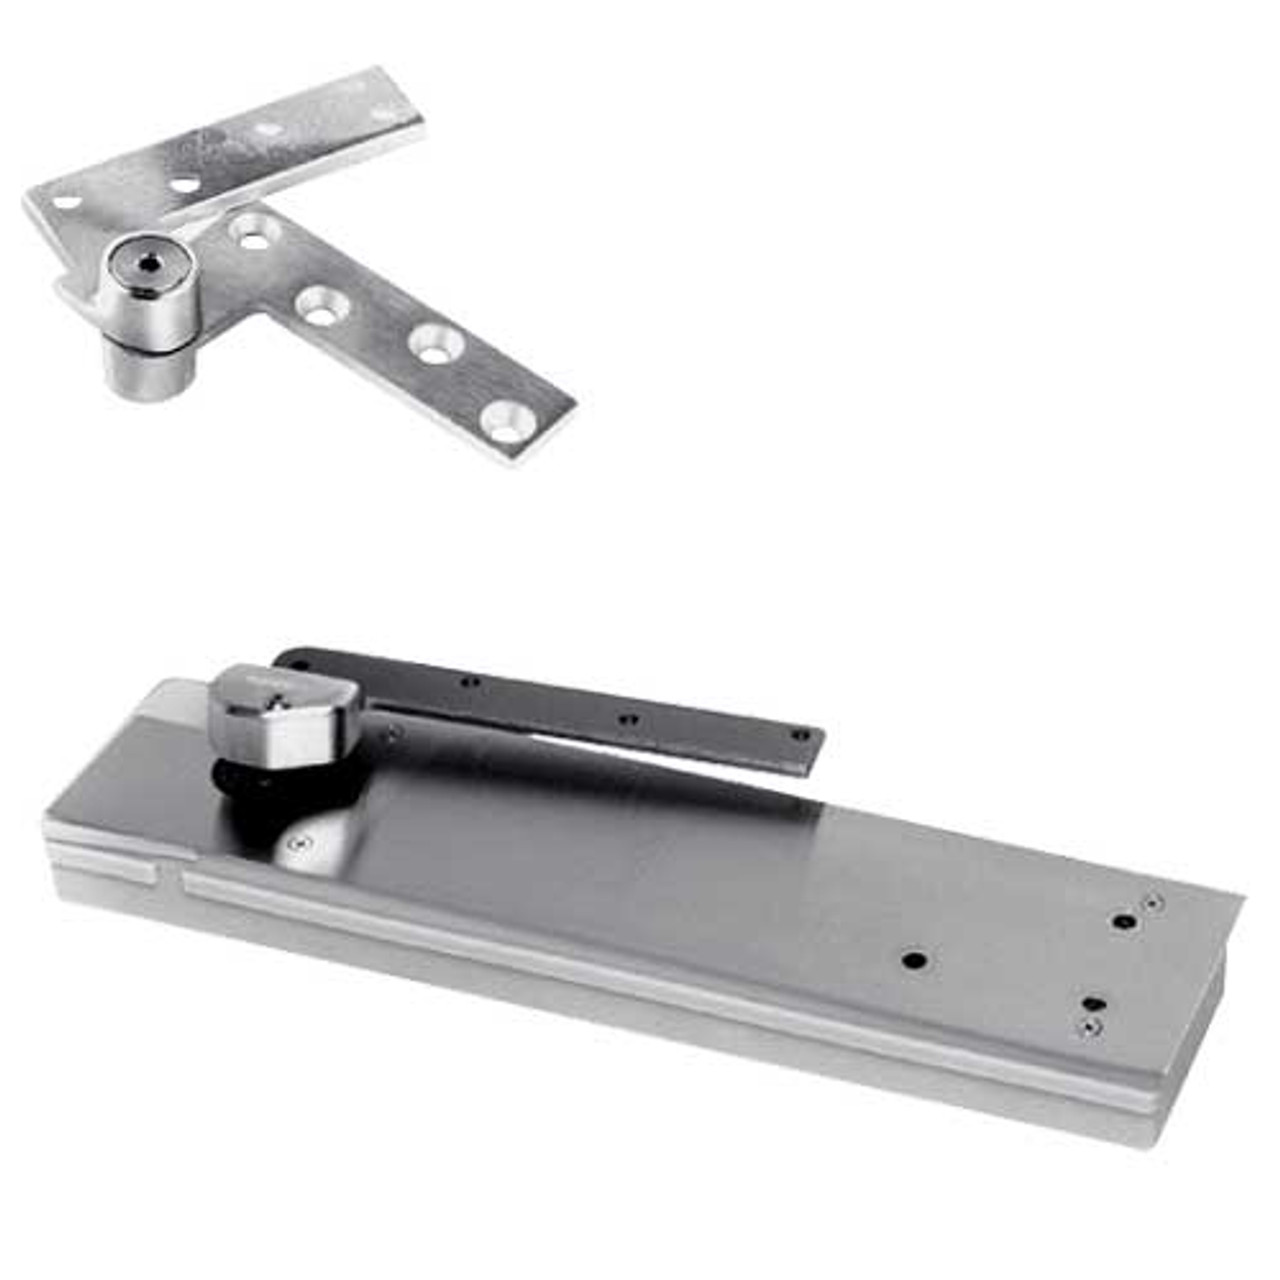 5103ABC105-LH-626 Rixson 51 Series 3/4" Offset Hung Shallow Depth Floor Closers in Satin Chrome Finish